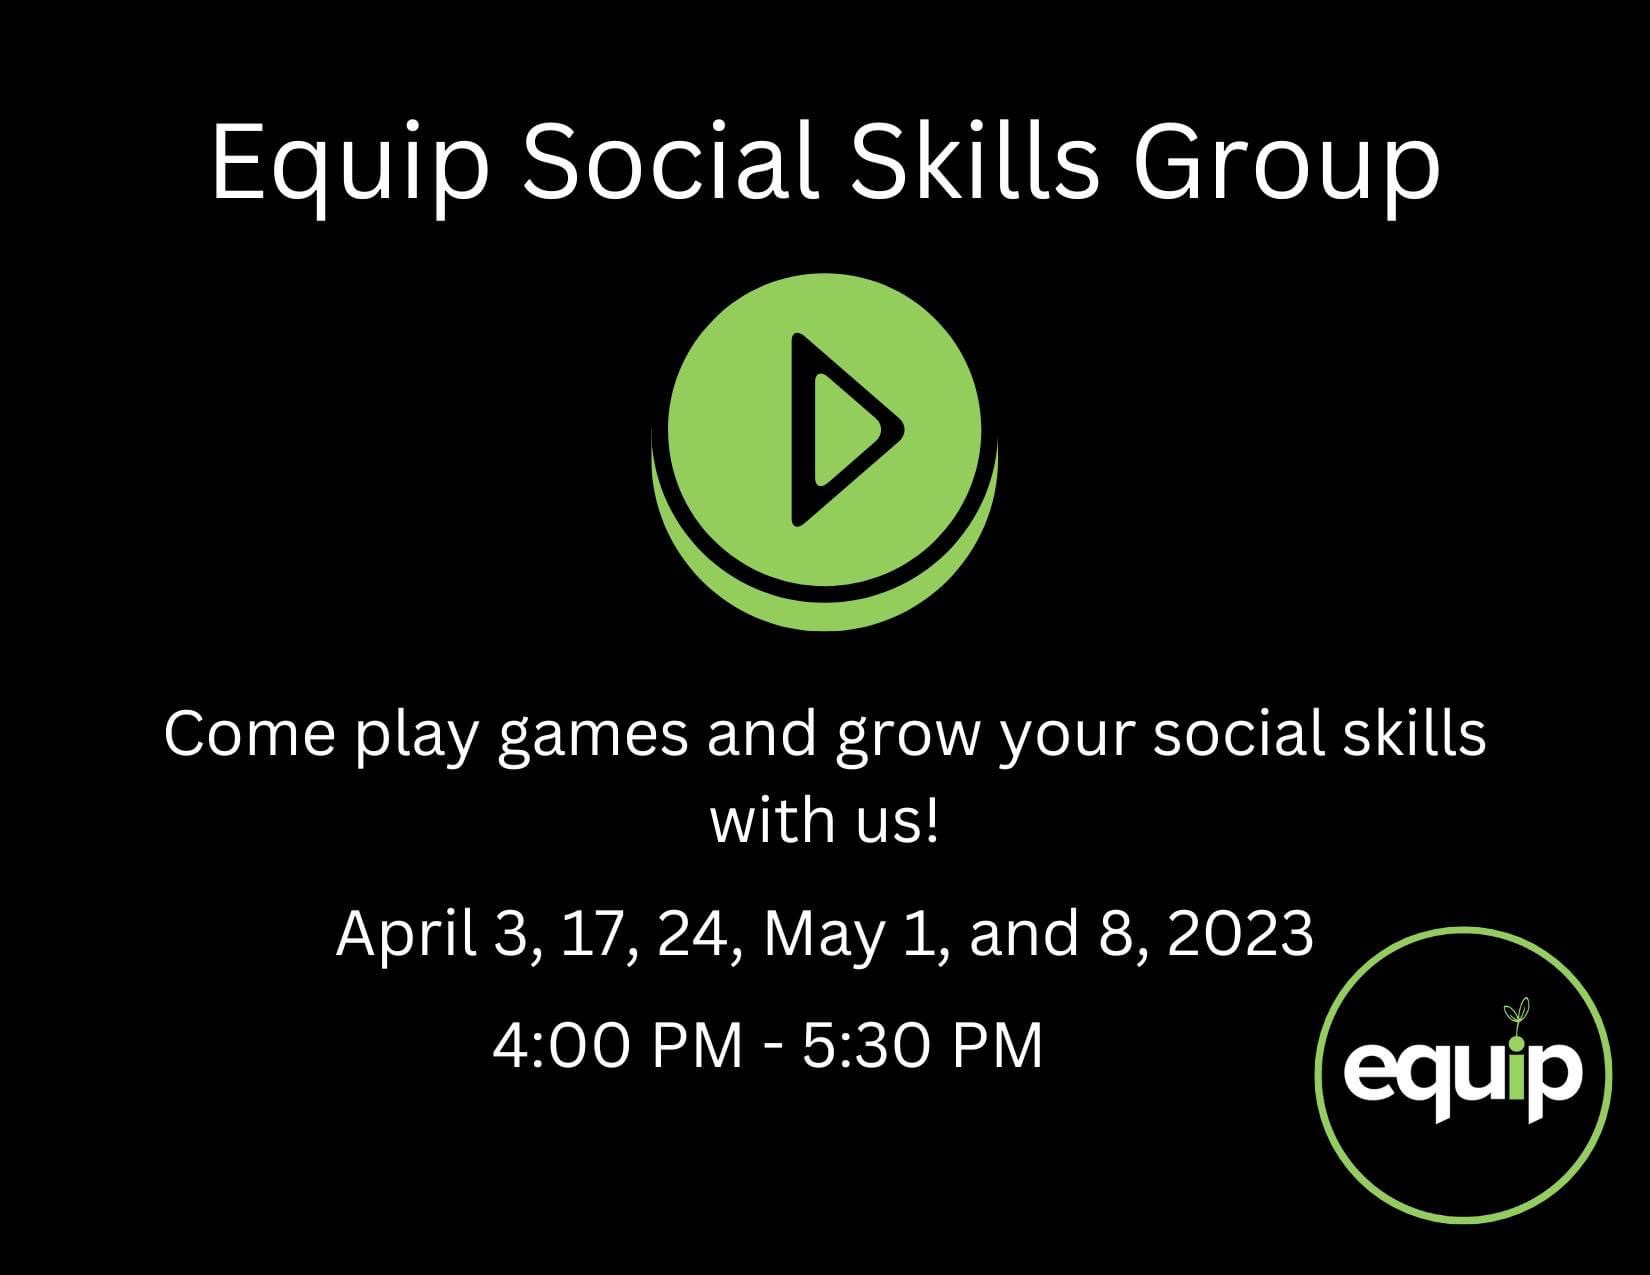 Black rectangle graphic. Centered at the top of the graphic is white text that reads, 'Equip Social Skills Group.' A green and black play button is centered below the white text. Underneath the play button is white text that reads, 'Come play games and grow your social skills with us! 'April 3, 17, 24, May 1 and 8, 2023,' '4-5:30 pm.' The Equip logo is in the bottom right corner.